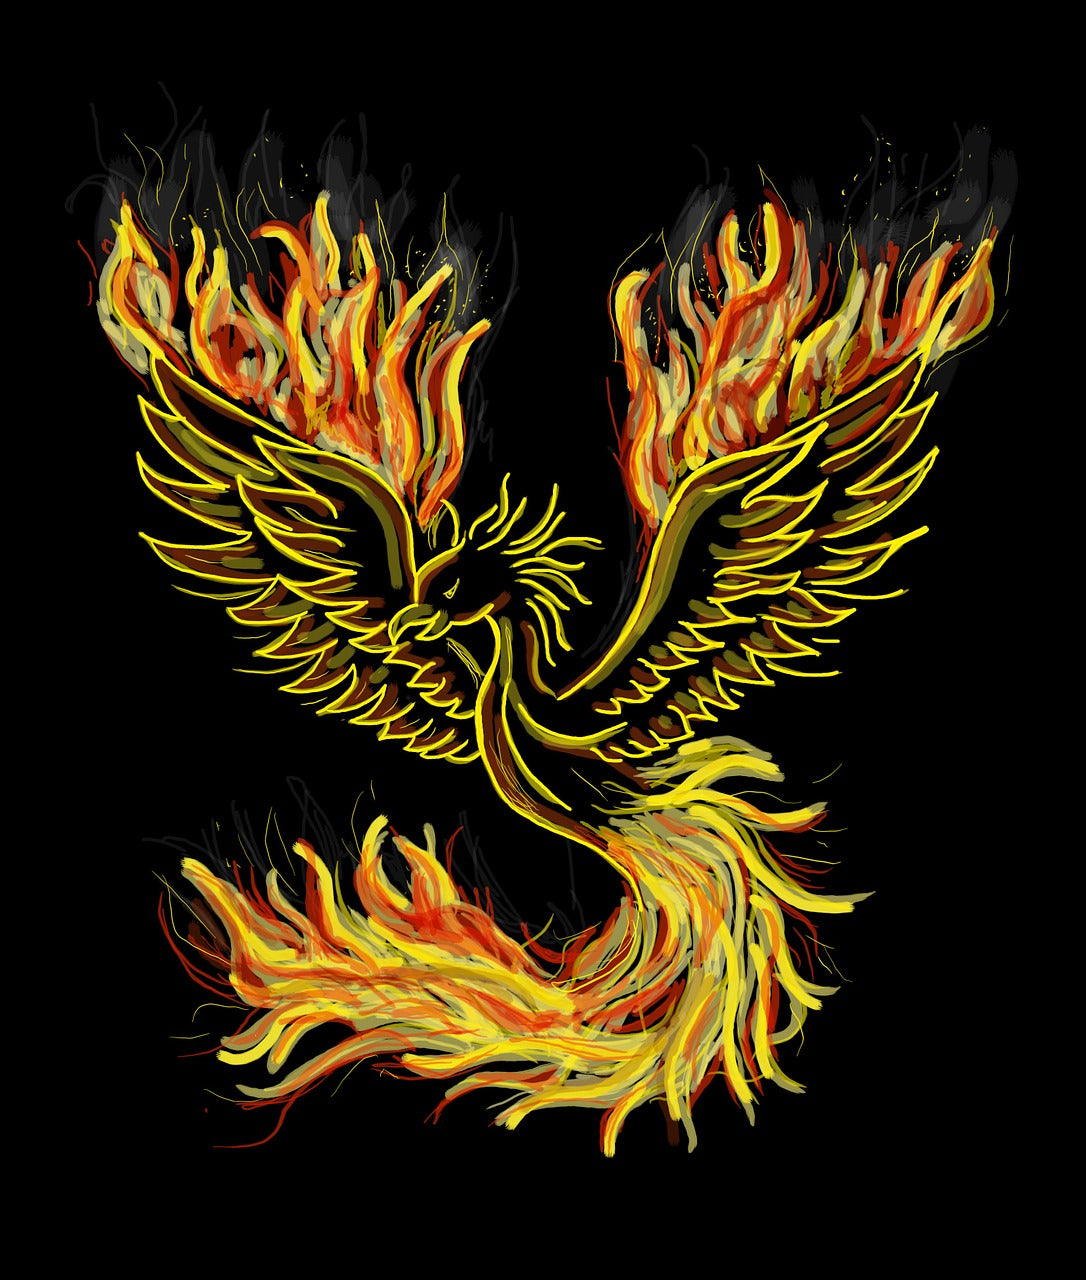 The Phoenix was known to be a majestic bird-like creature that lived in Paradise. The Phoenix, like all other creatures who live in Paradise, was known to live a good life. It was a land of unimaginable perfection and beauty and was said to exist somewher